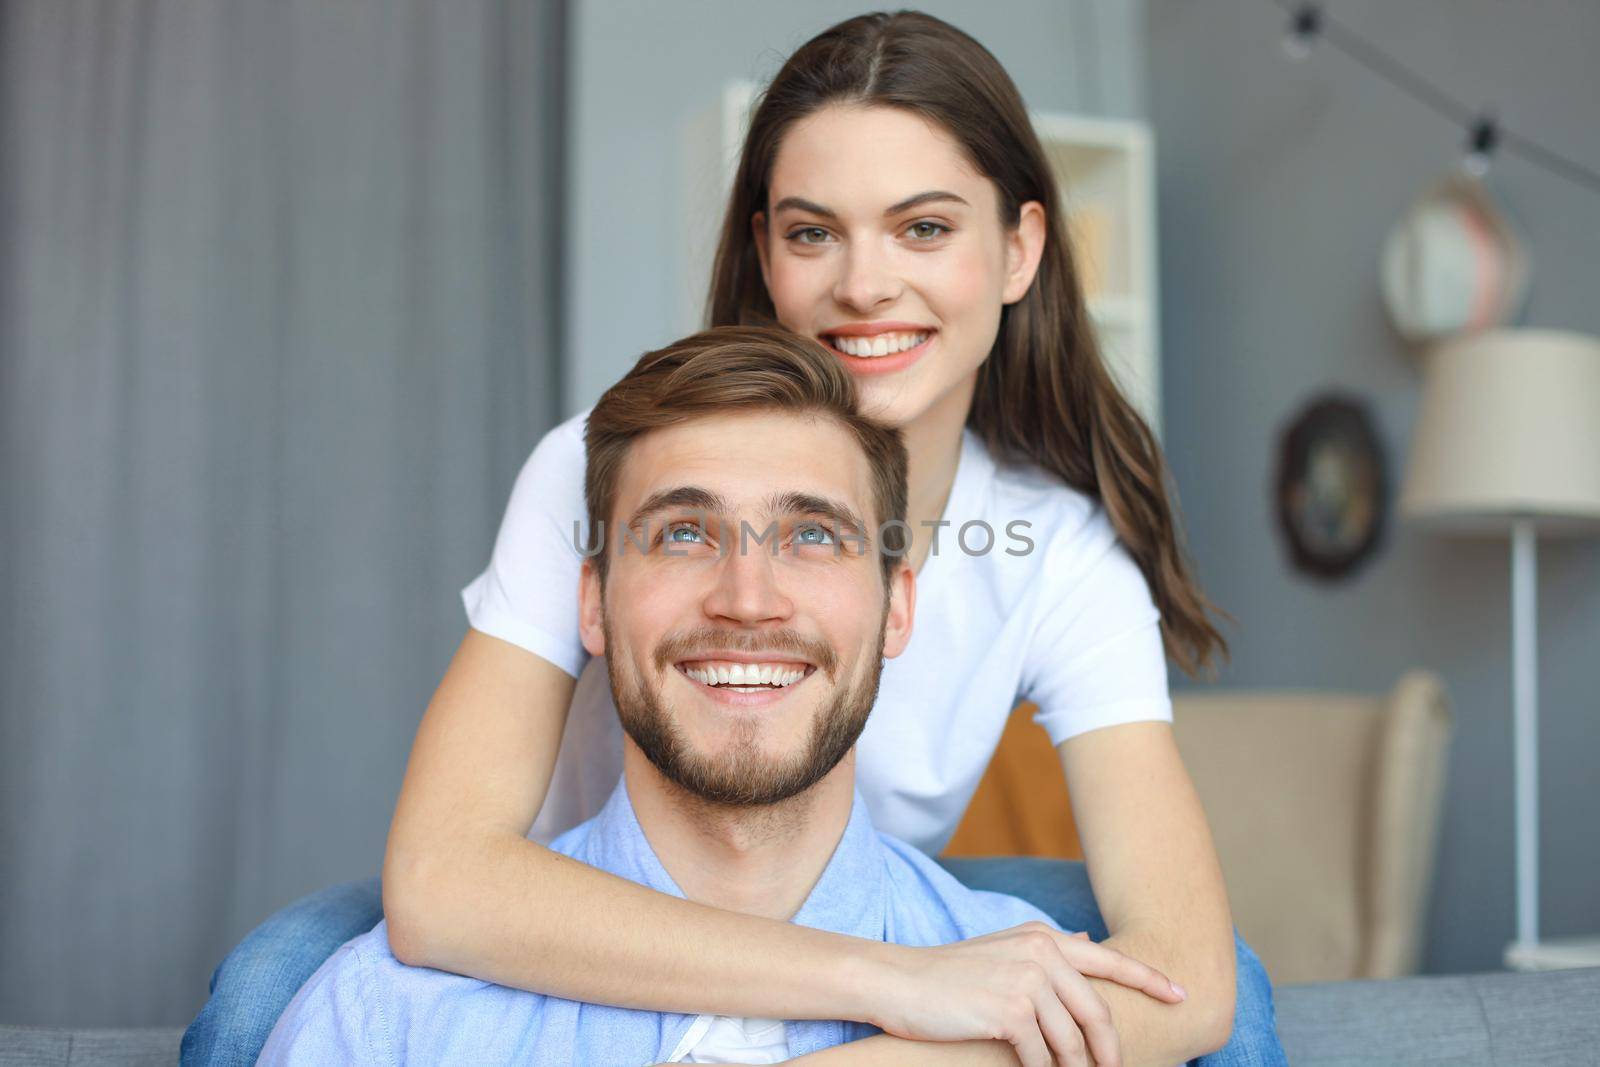 Beautiful woman with boyfriend spending quality time together on sofa at home in the living room